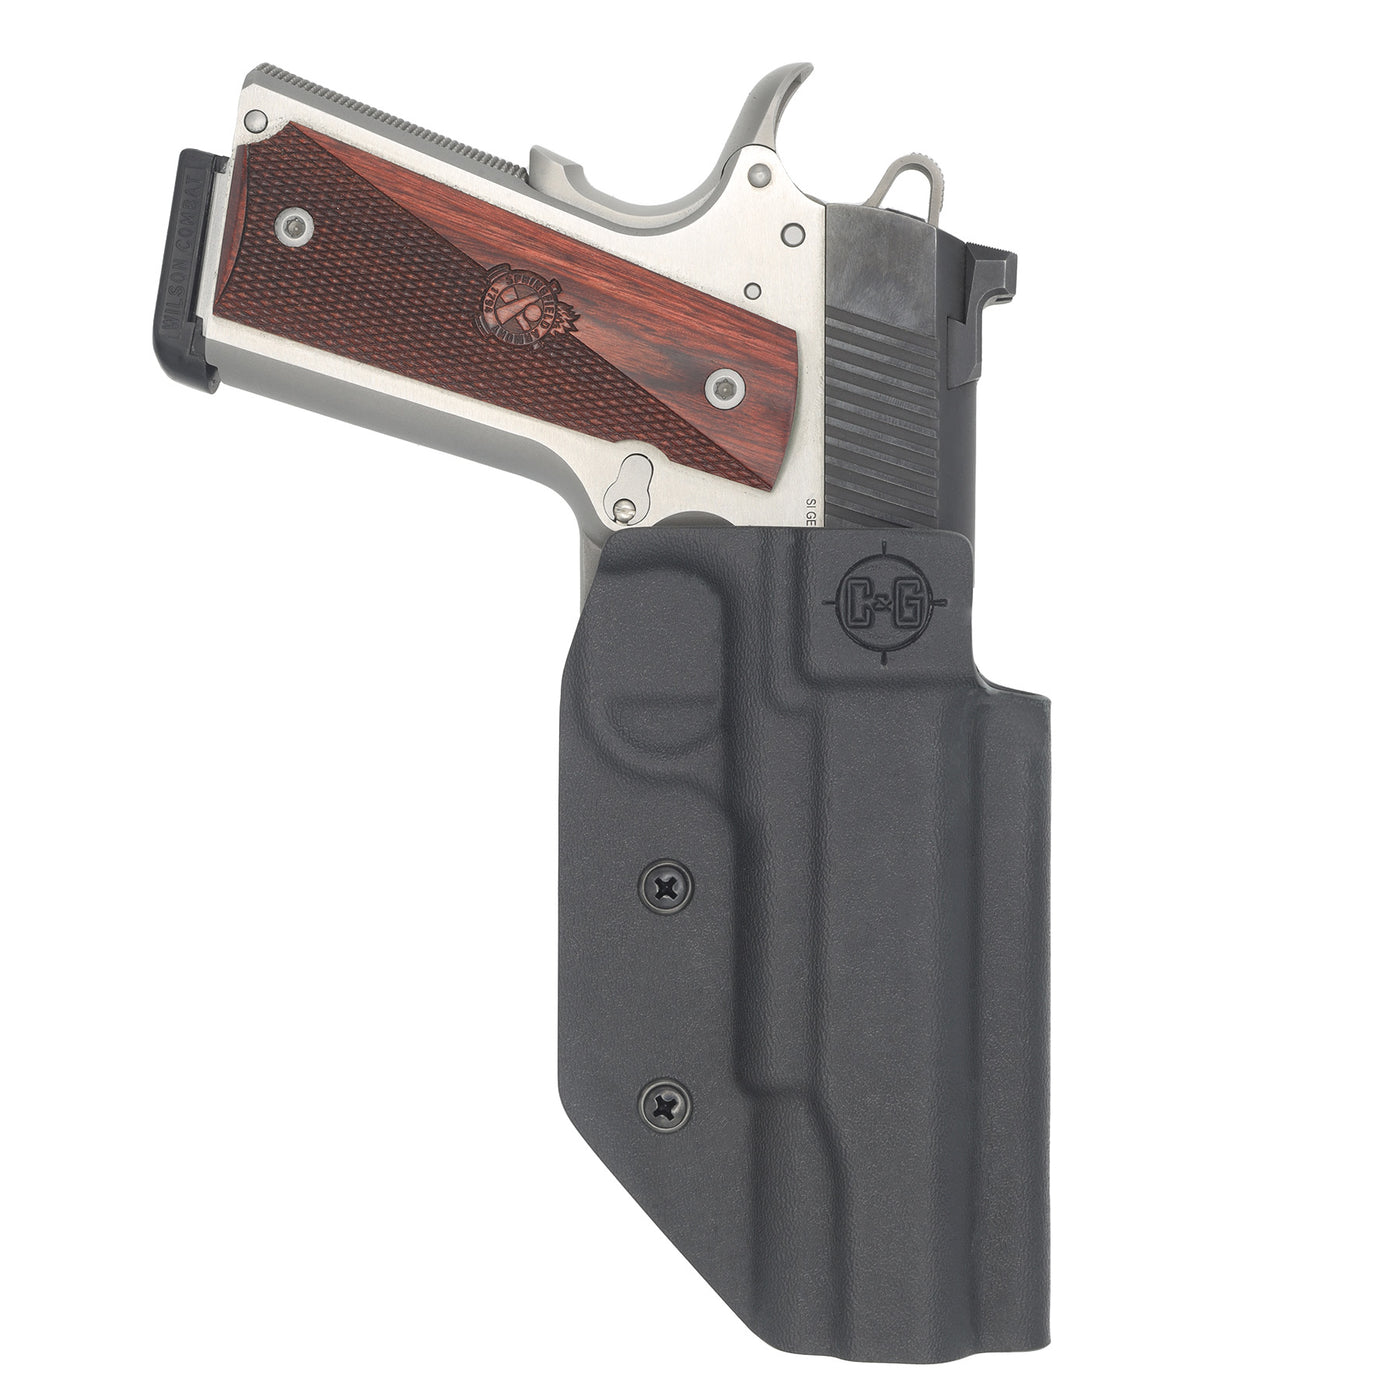 C&G Holsters quickship COMPETITION kydex holster 1911